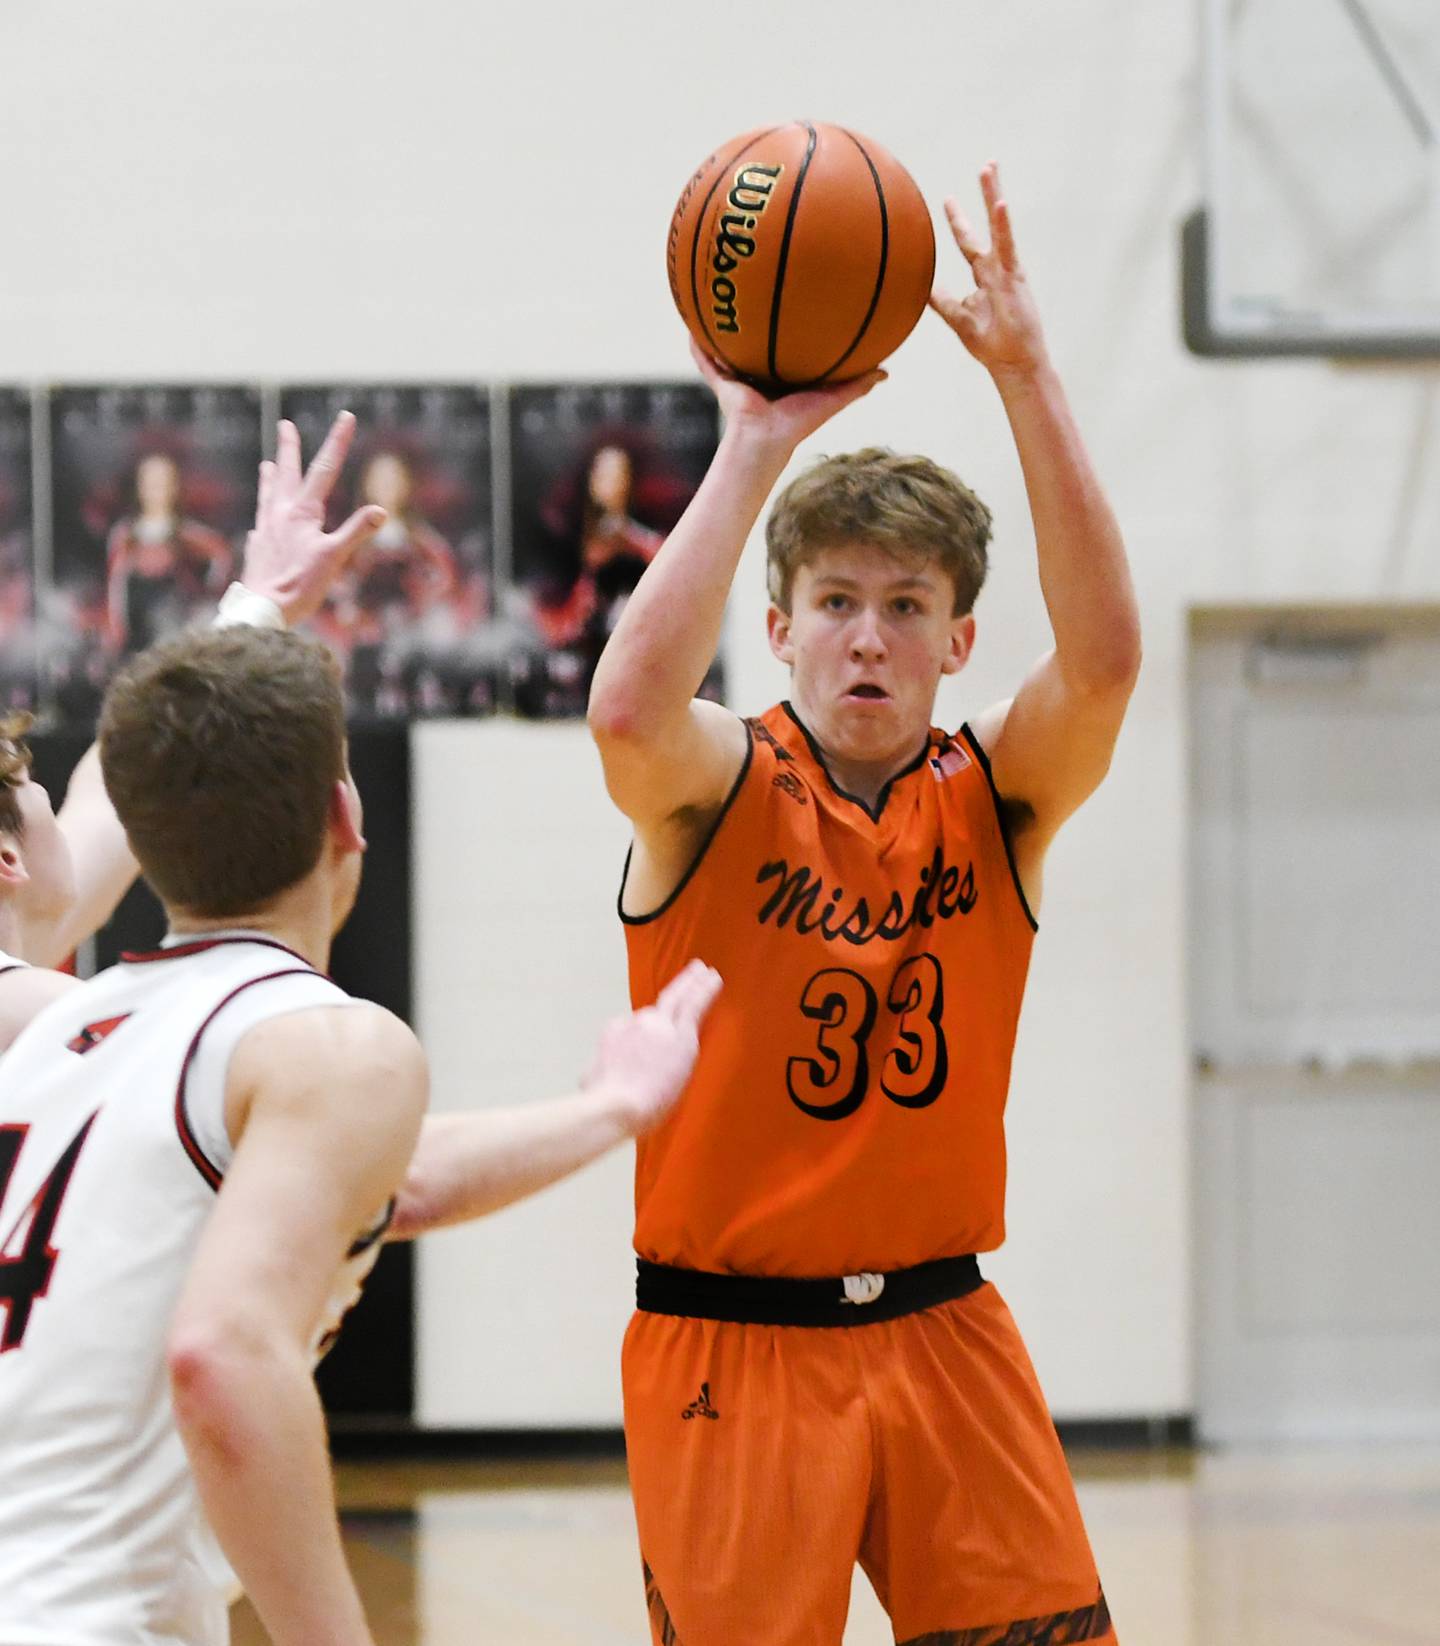 Milledgeville's Karter Livengod shoots during a Friday, Jan. 27 NUIC game in Forreston.